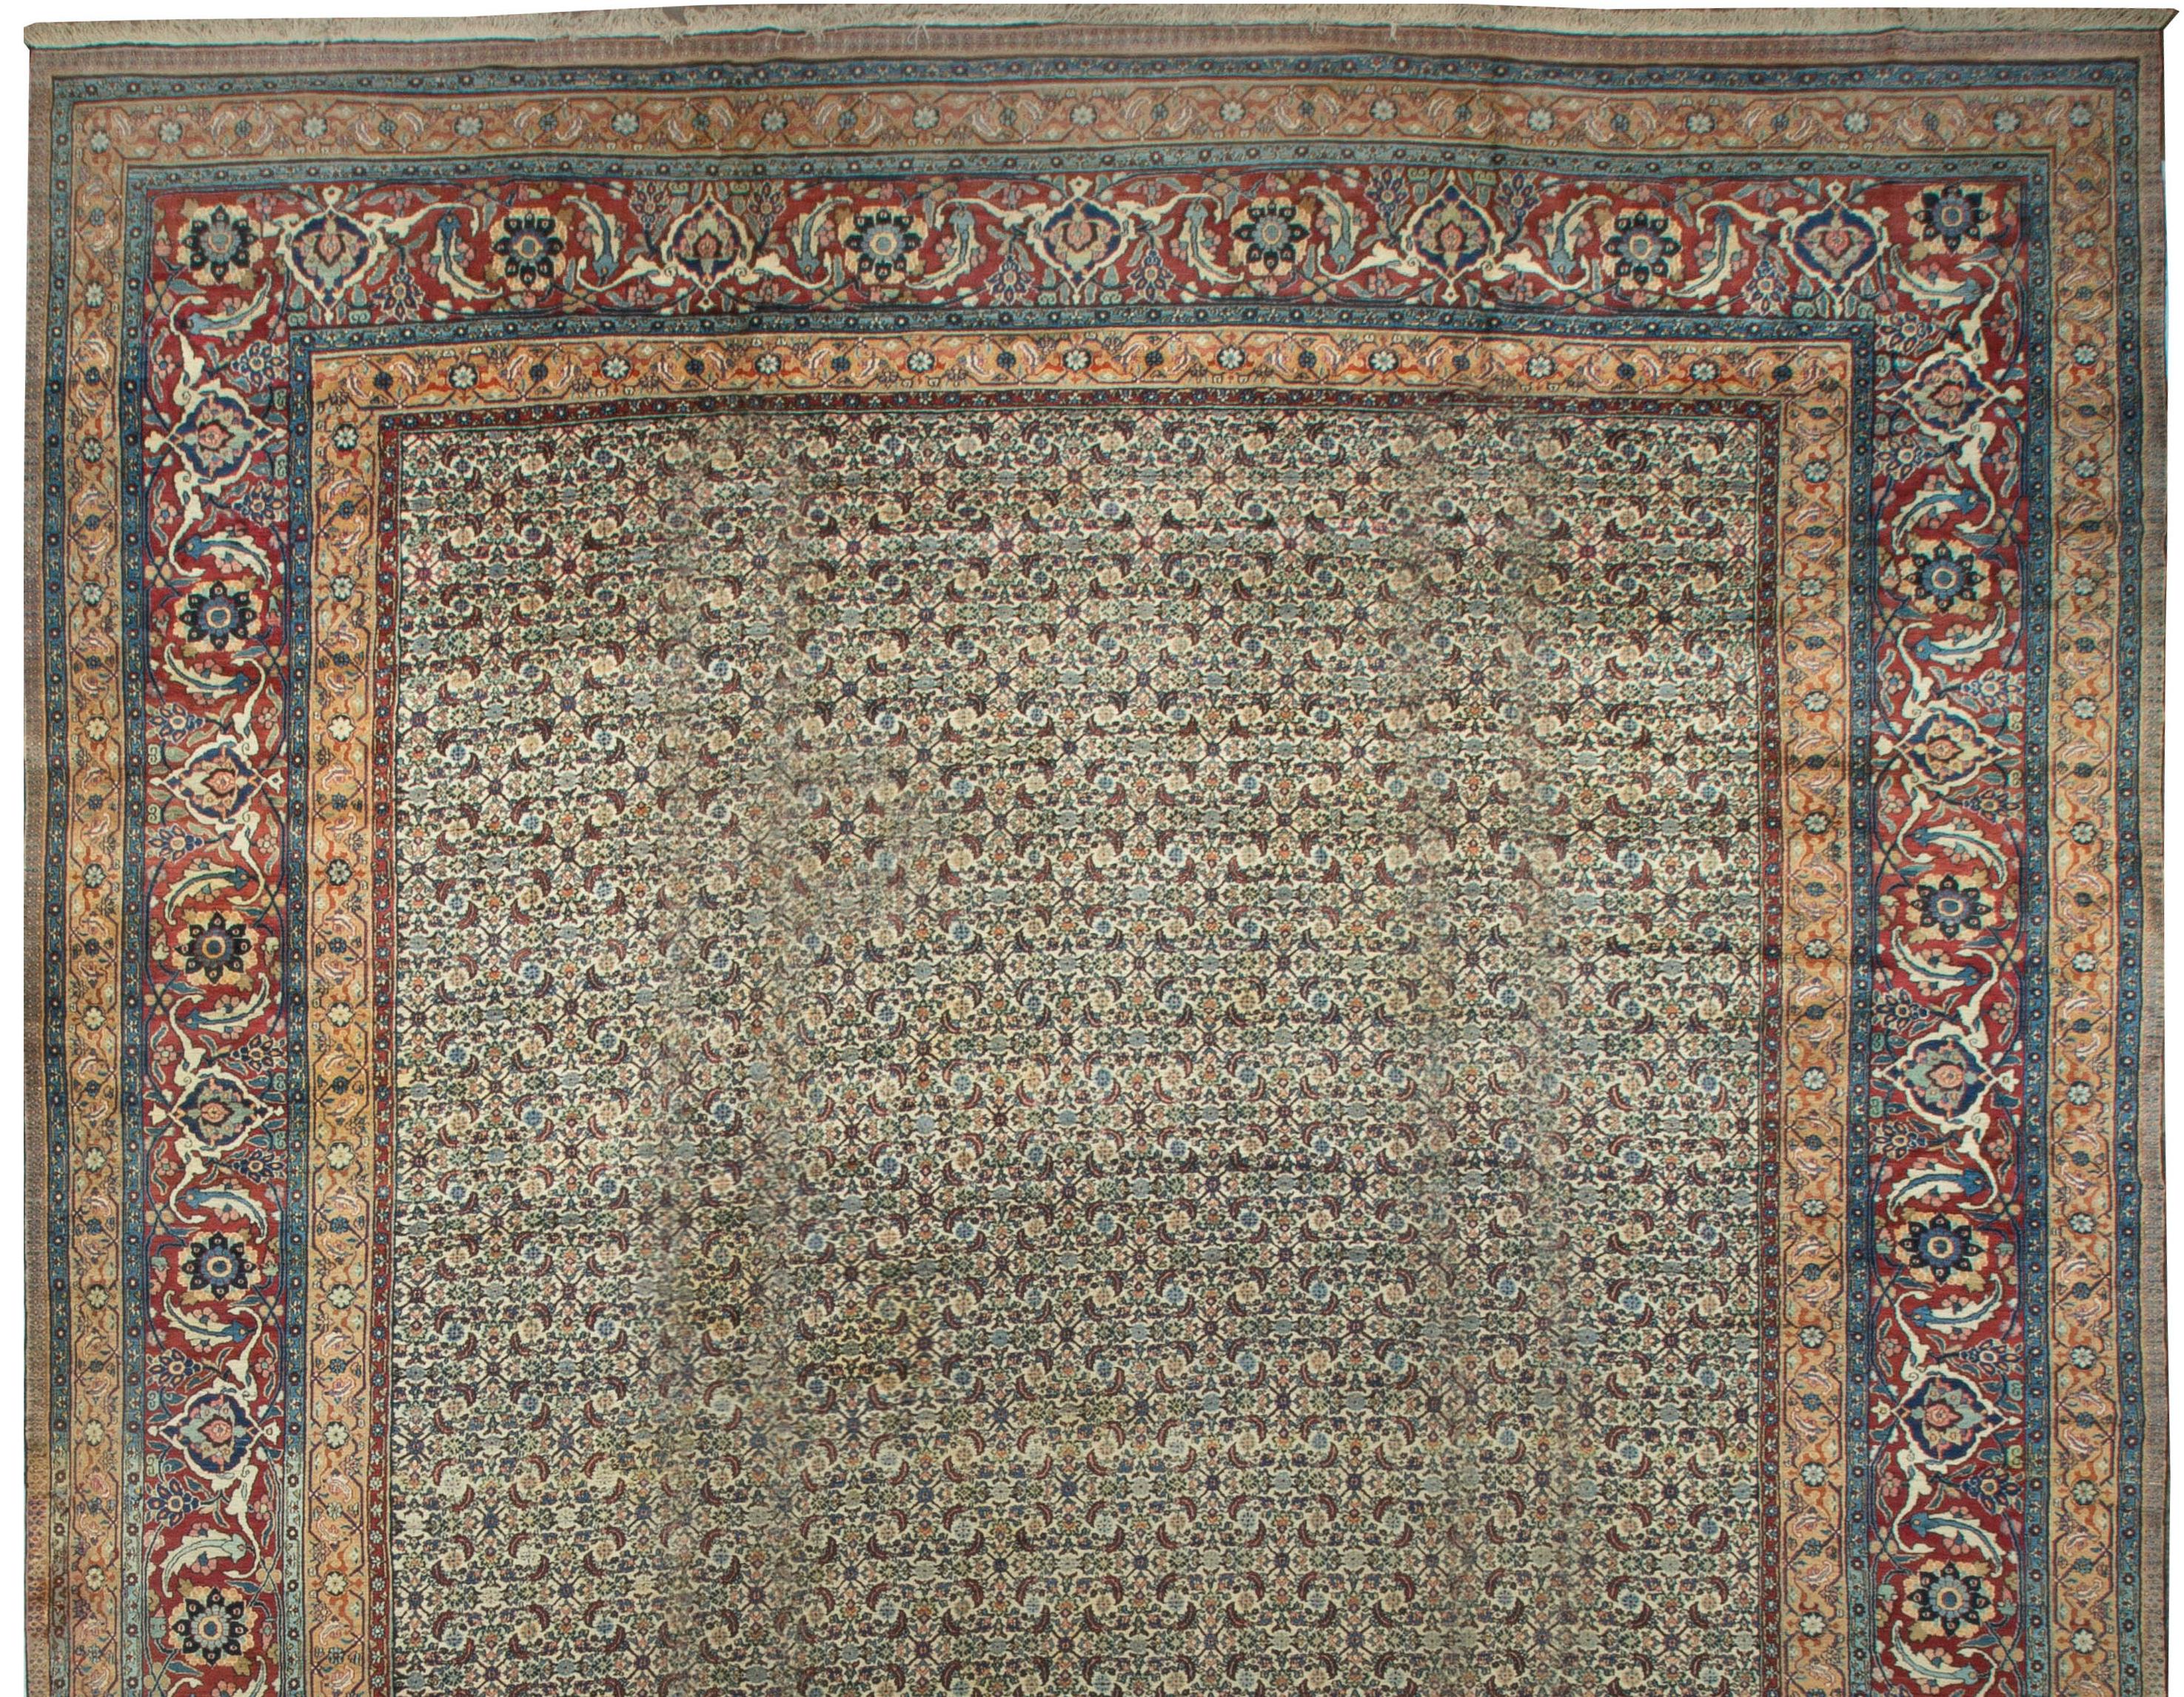 Oversize Vintage Persian Khorassan Rug, circa 1920 16' x 26'2 In Good Condition For Sale In Secaucus, NJ